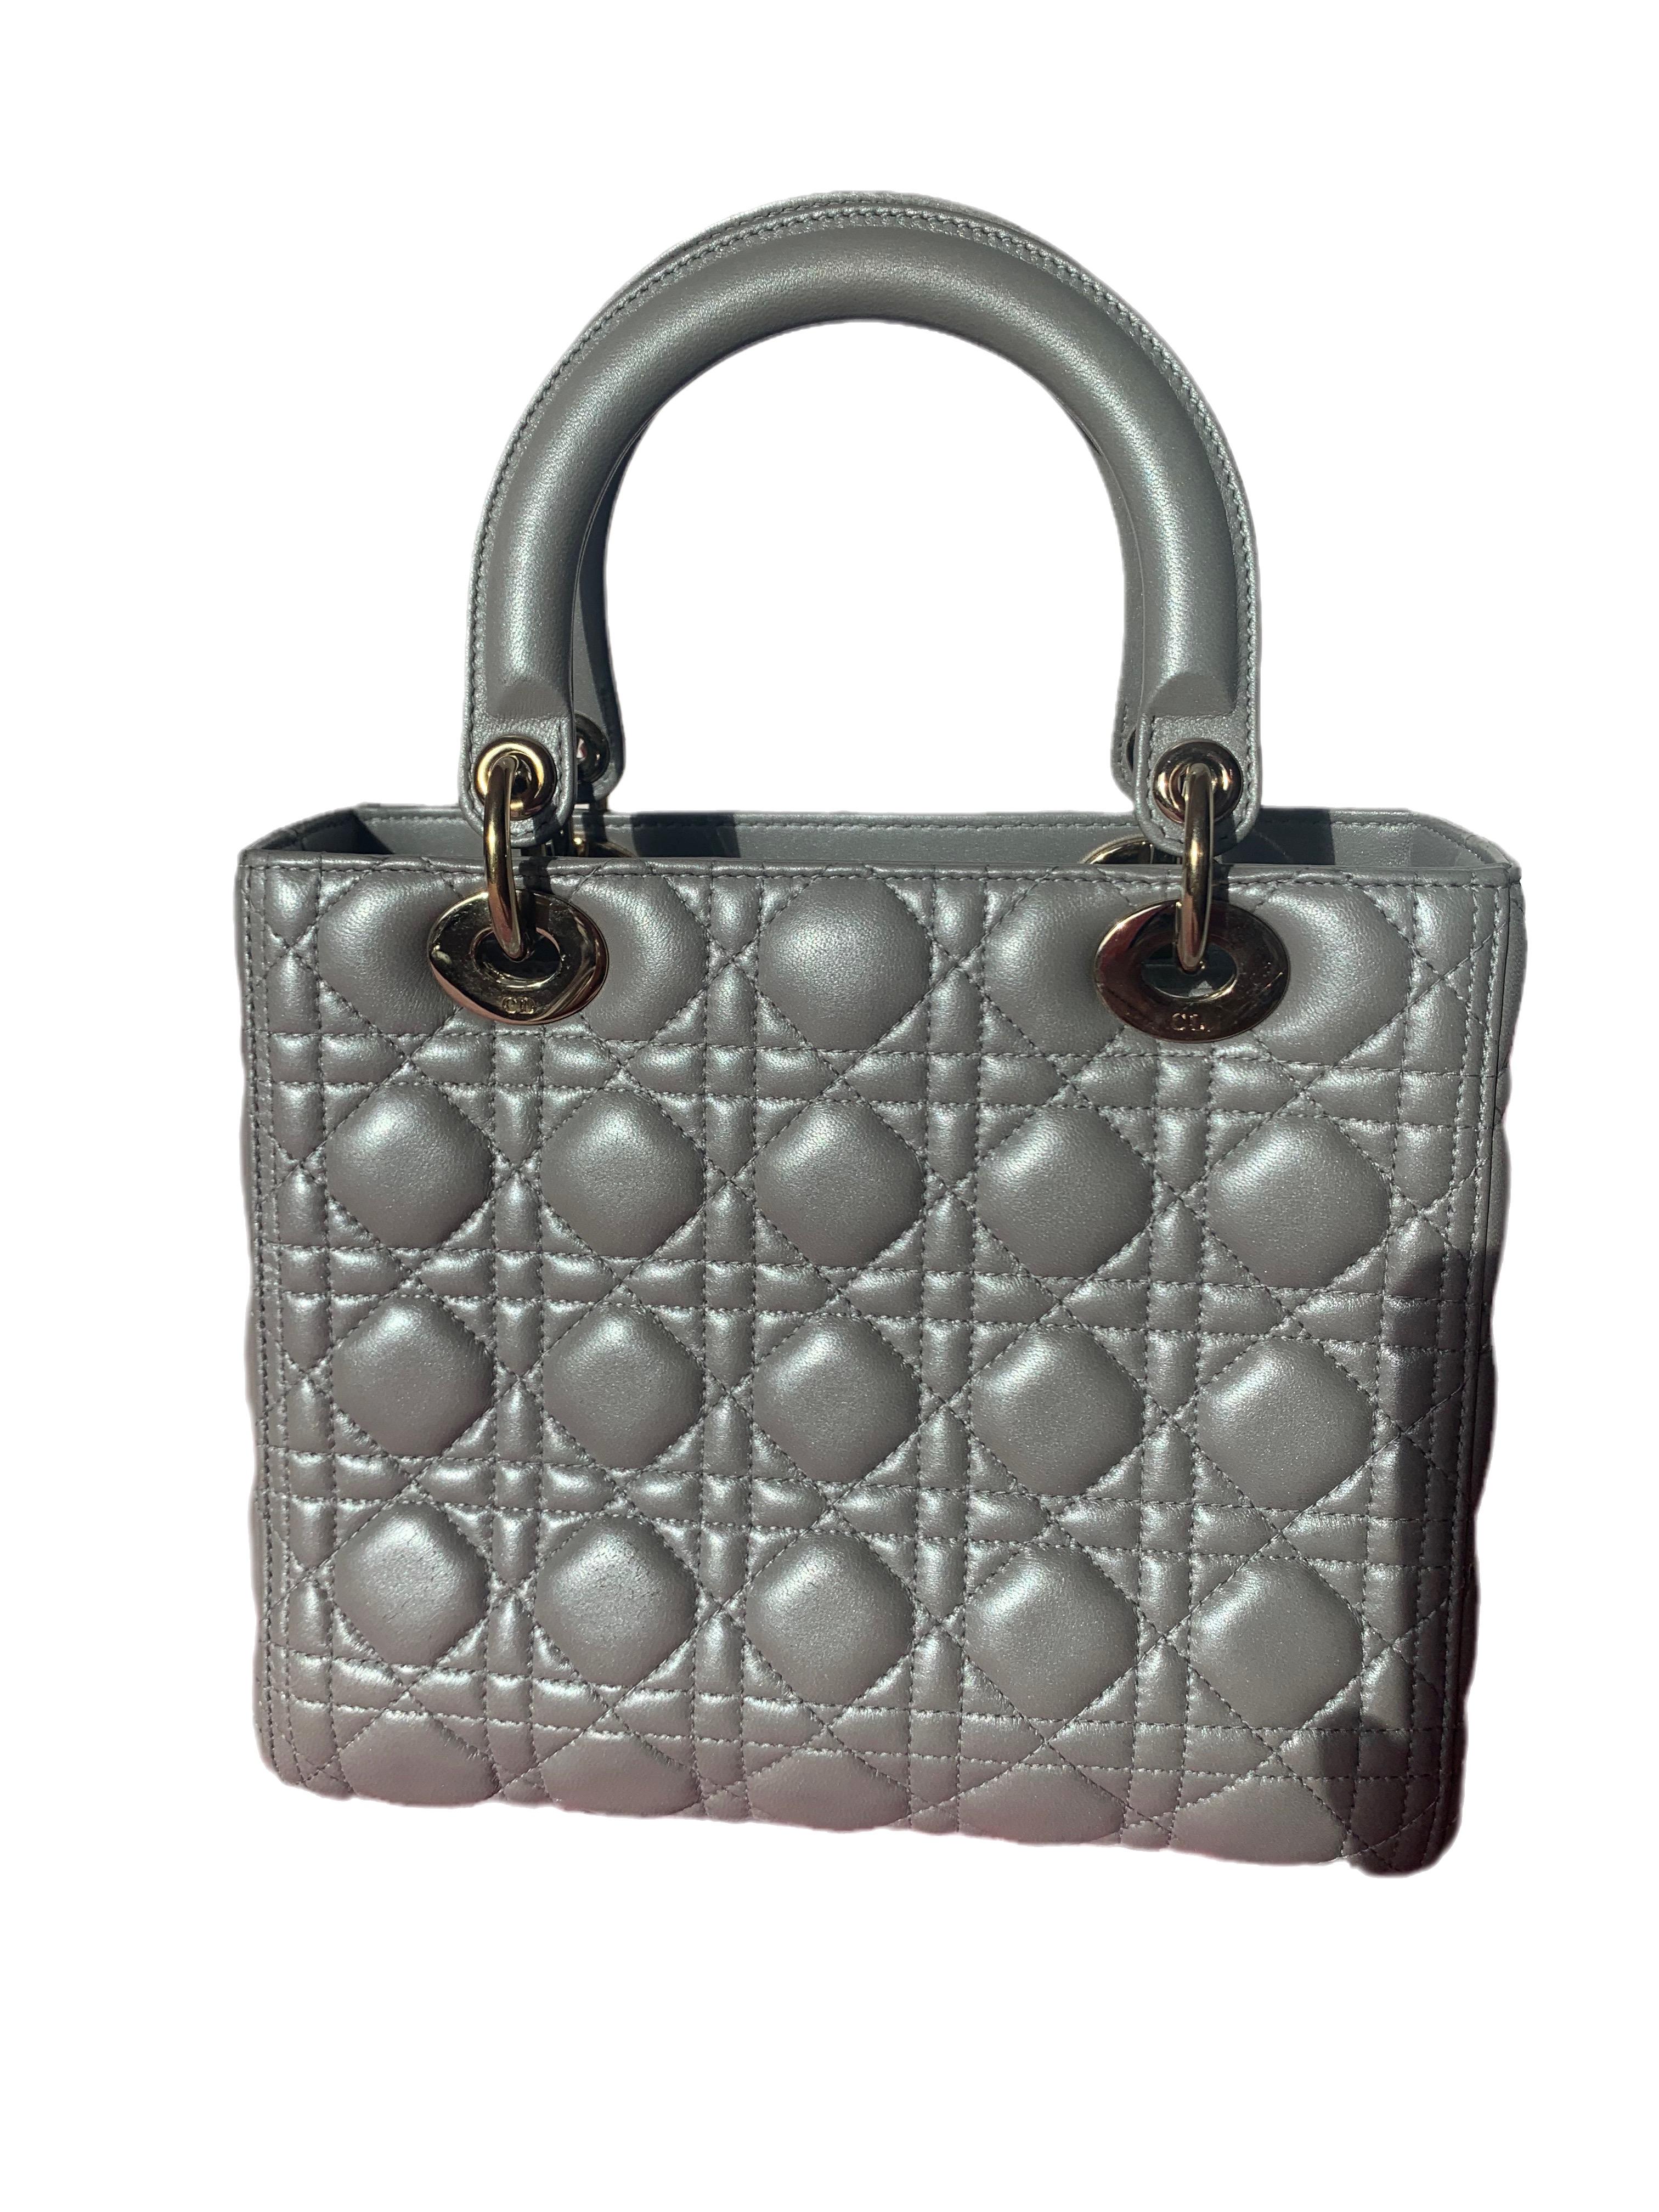 The Lady Dior bag is an epitome of elegance and beauty. Accentuate your look with the timeless style of Medium Lady Dior, crafted in Pearlescent Grey Lambskin Leather. This classic bag features a cannage stitch, creating a beautiful silhouette and